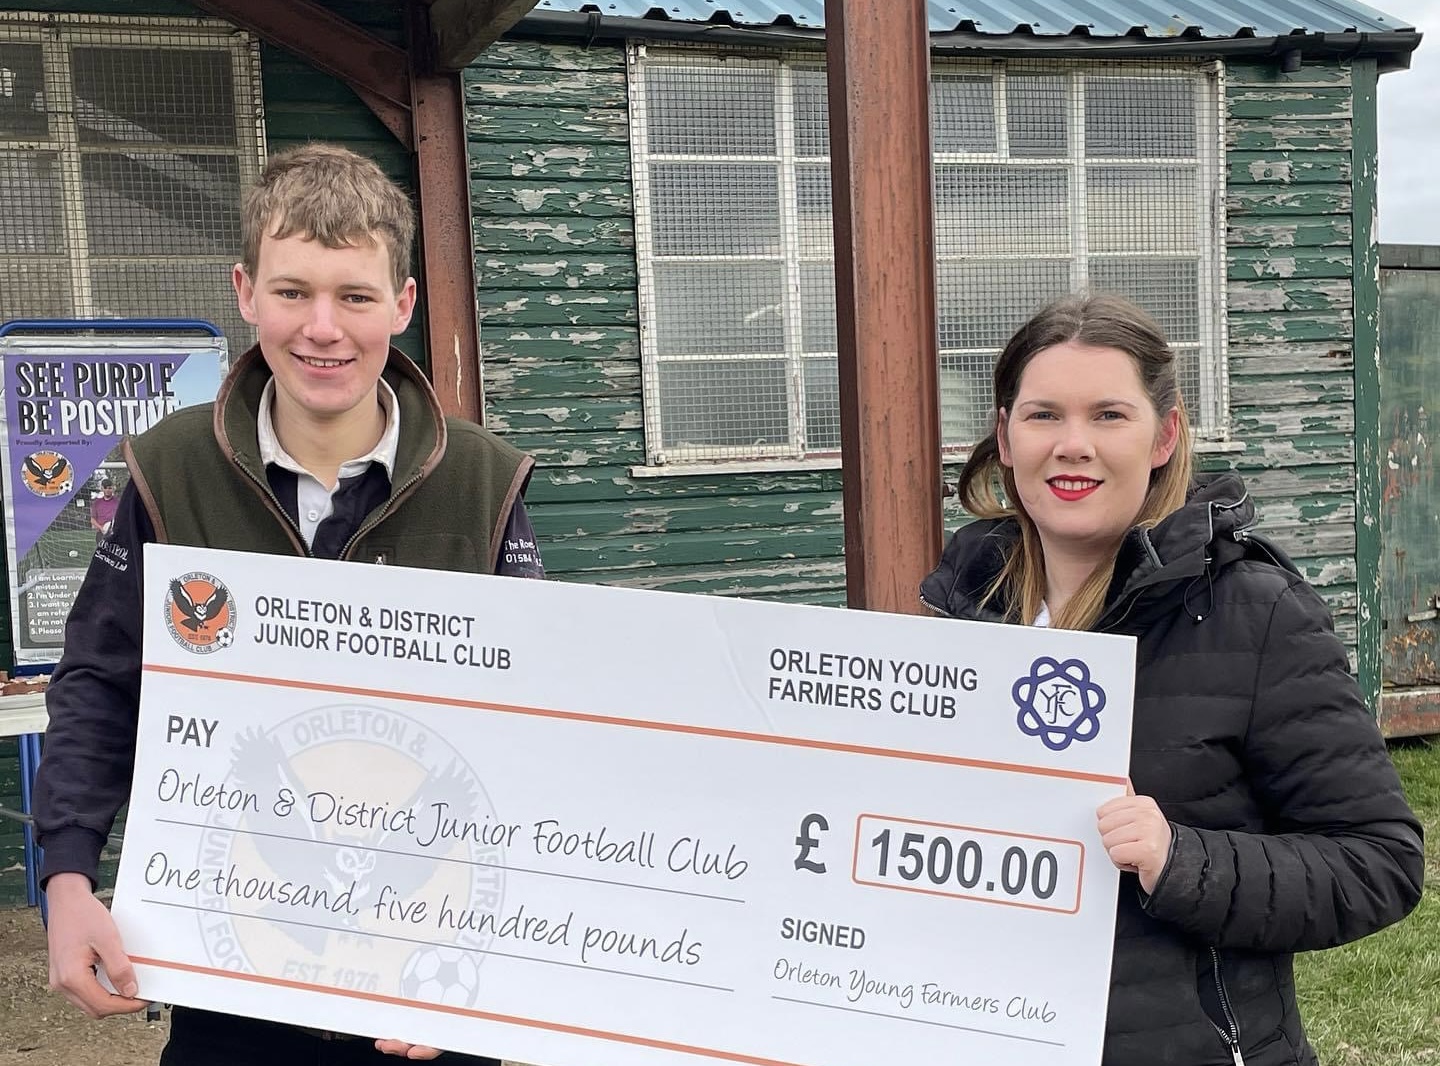 NEWS | Orleton Young Farmers annual Bonfire and Fireworks show raises £1,500 for local junior football club